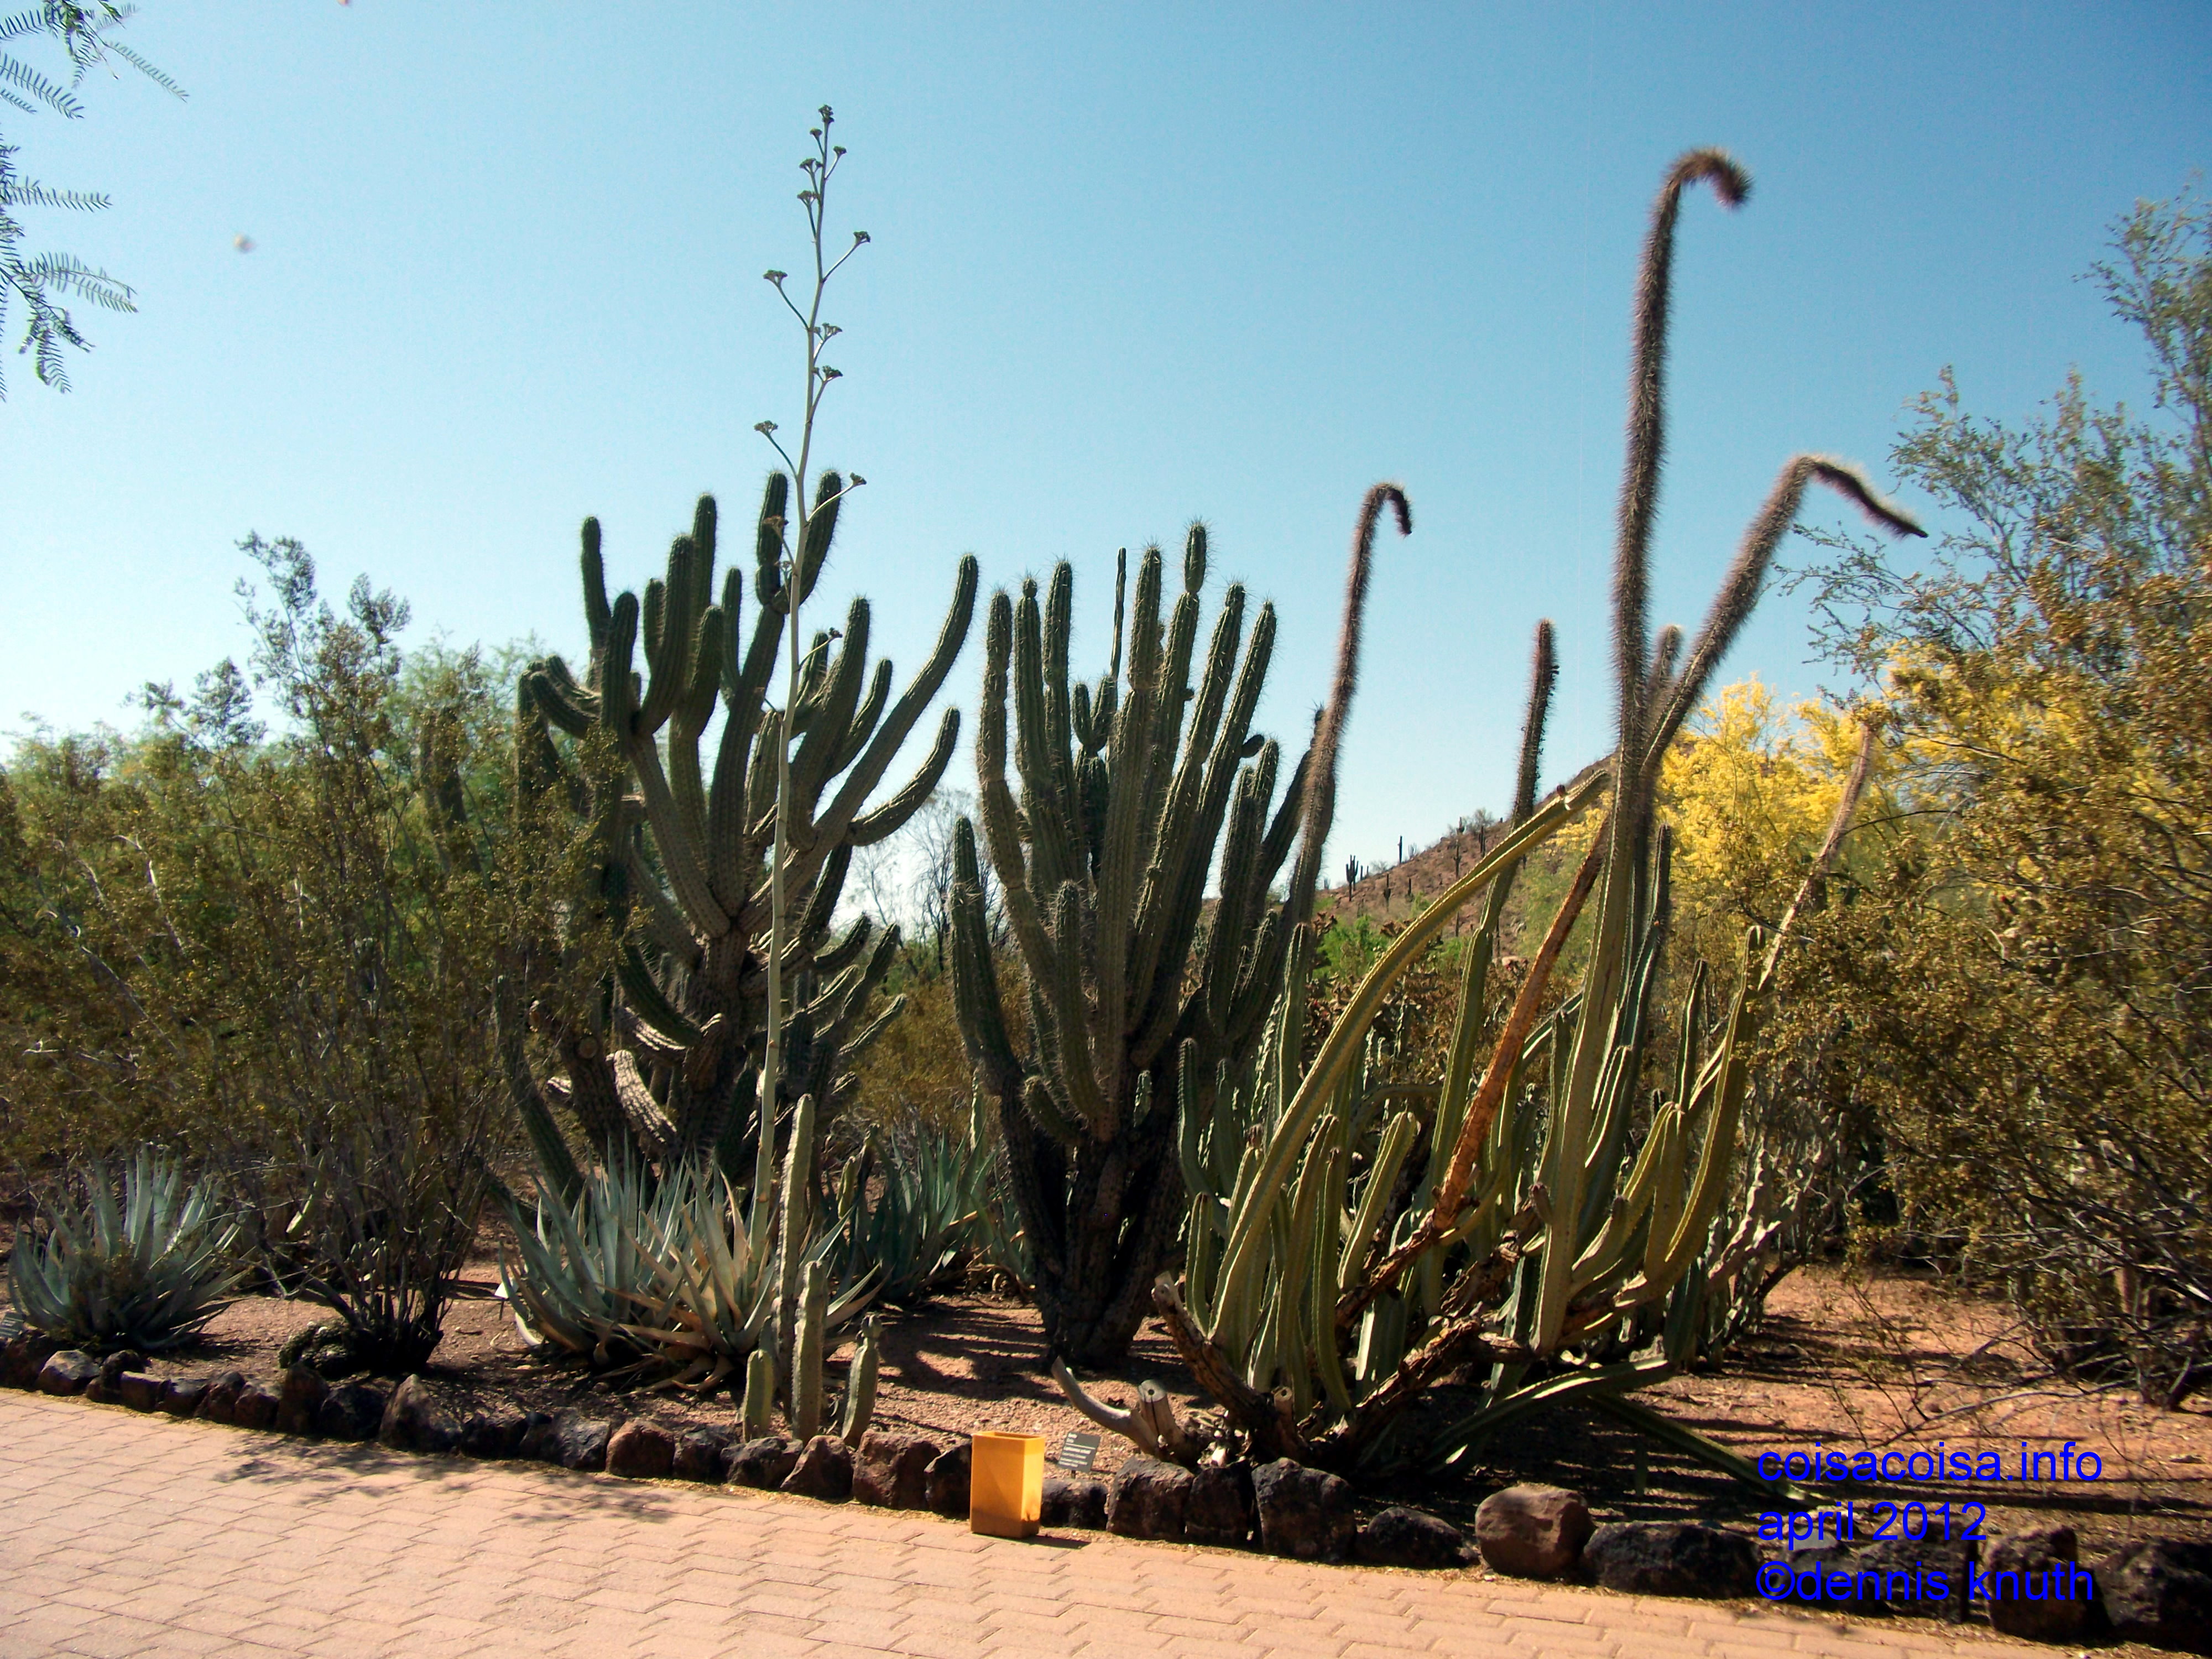 Cacti families are grouped in the Botanical Garden